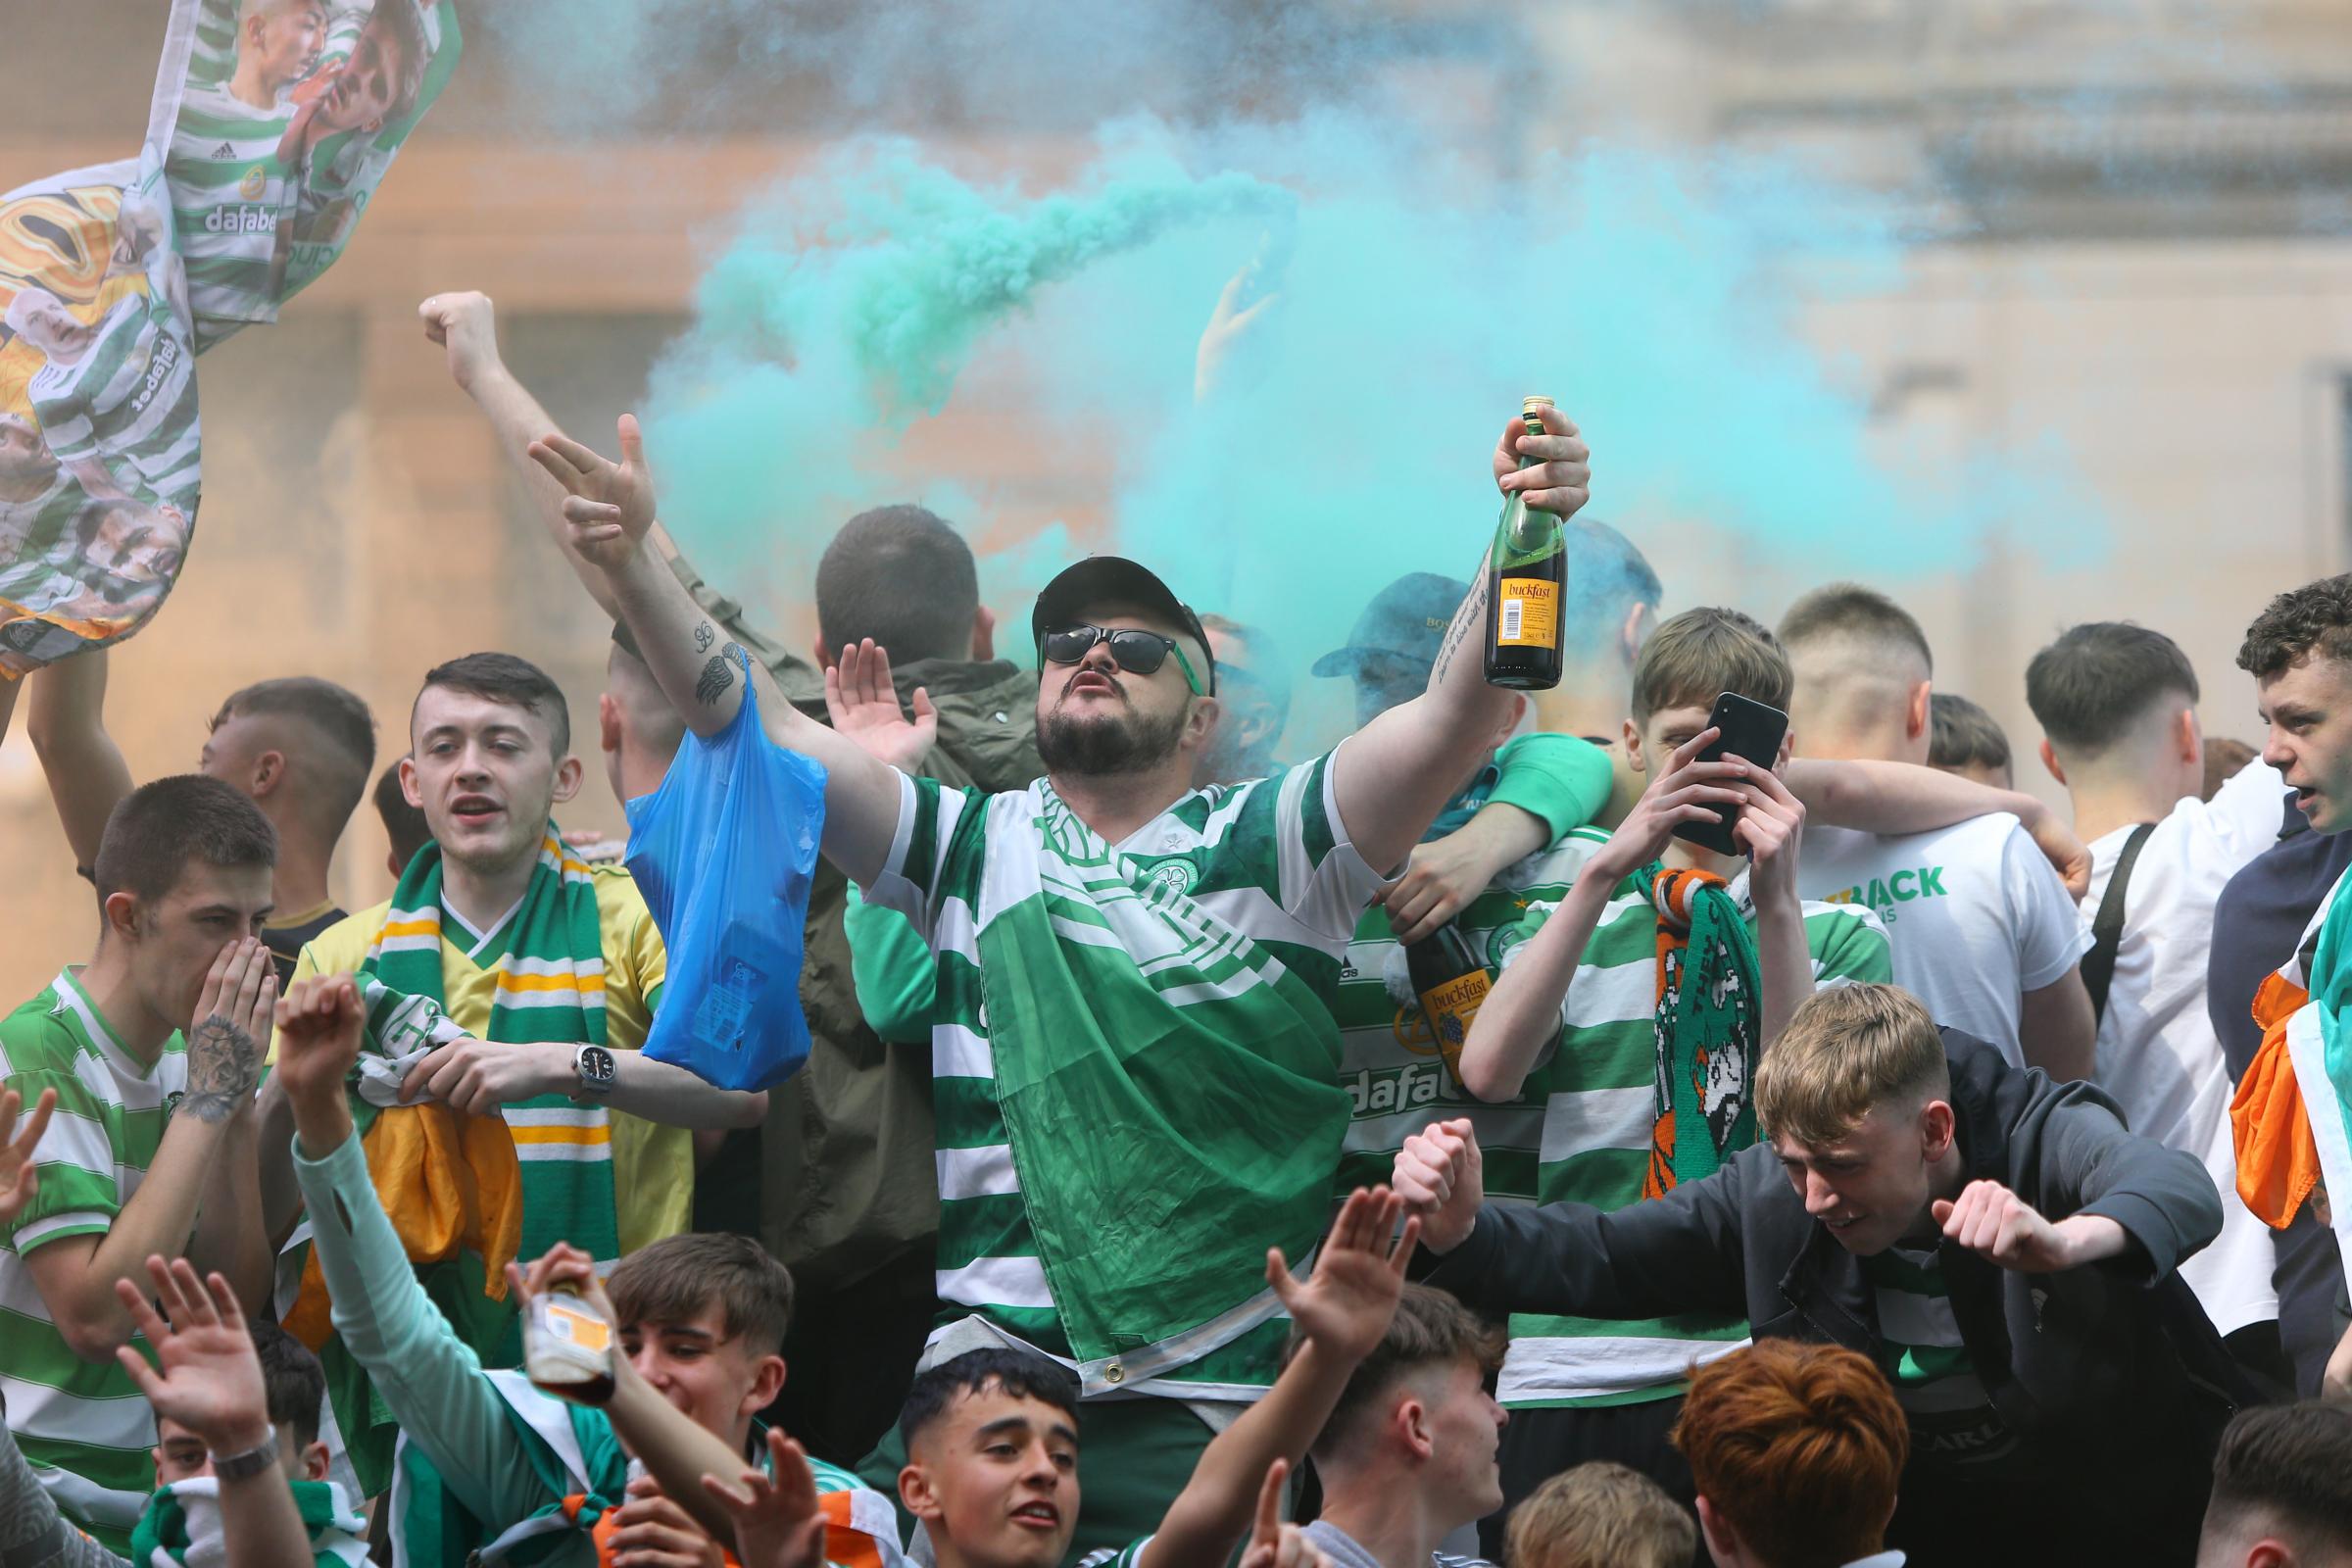 Celtic fans urged to celebrate respectfully in Glasgow's Trongate